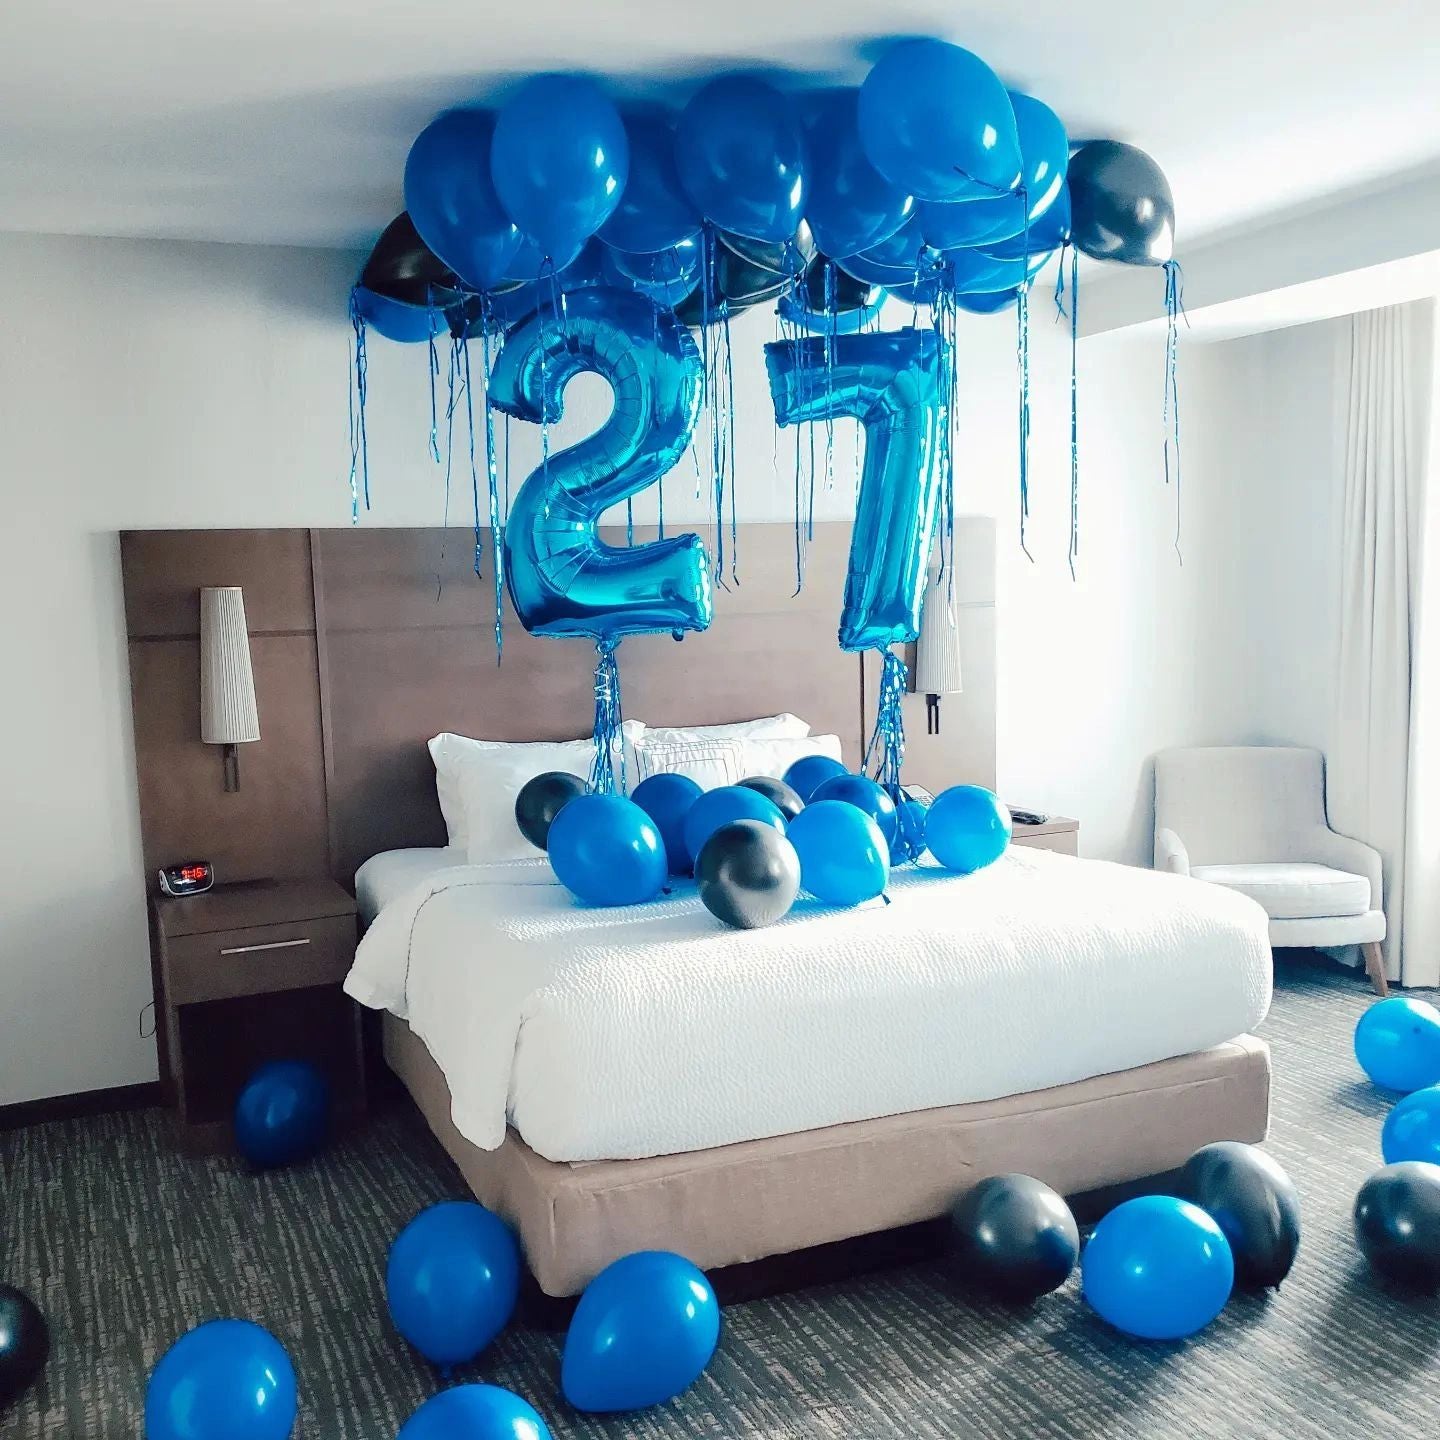 Blue balloon hanging on wall of room